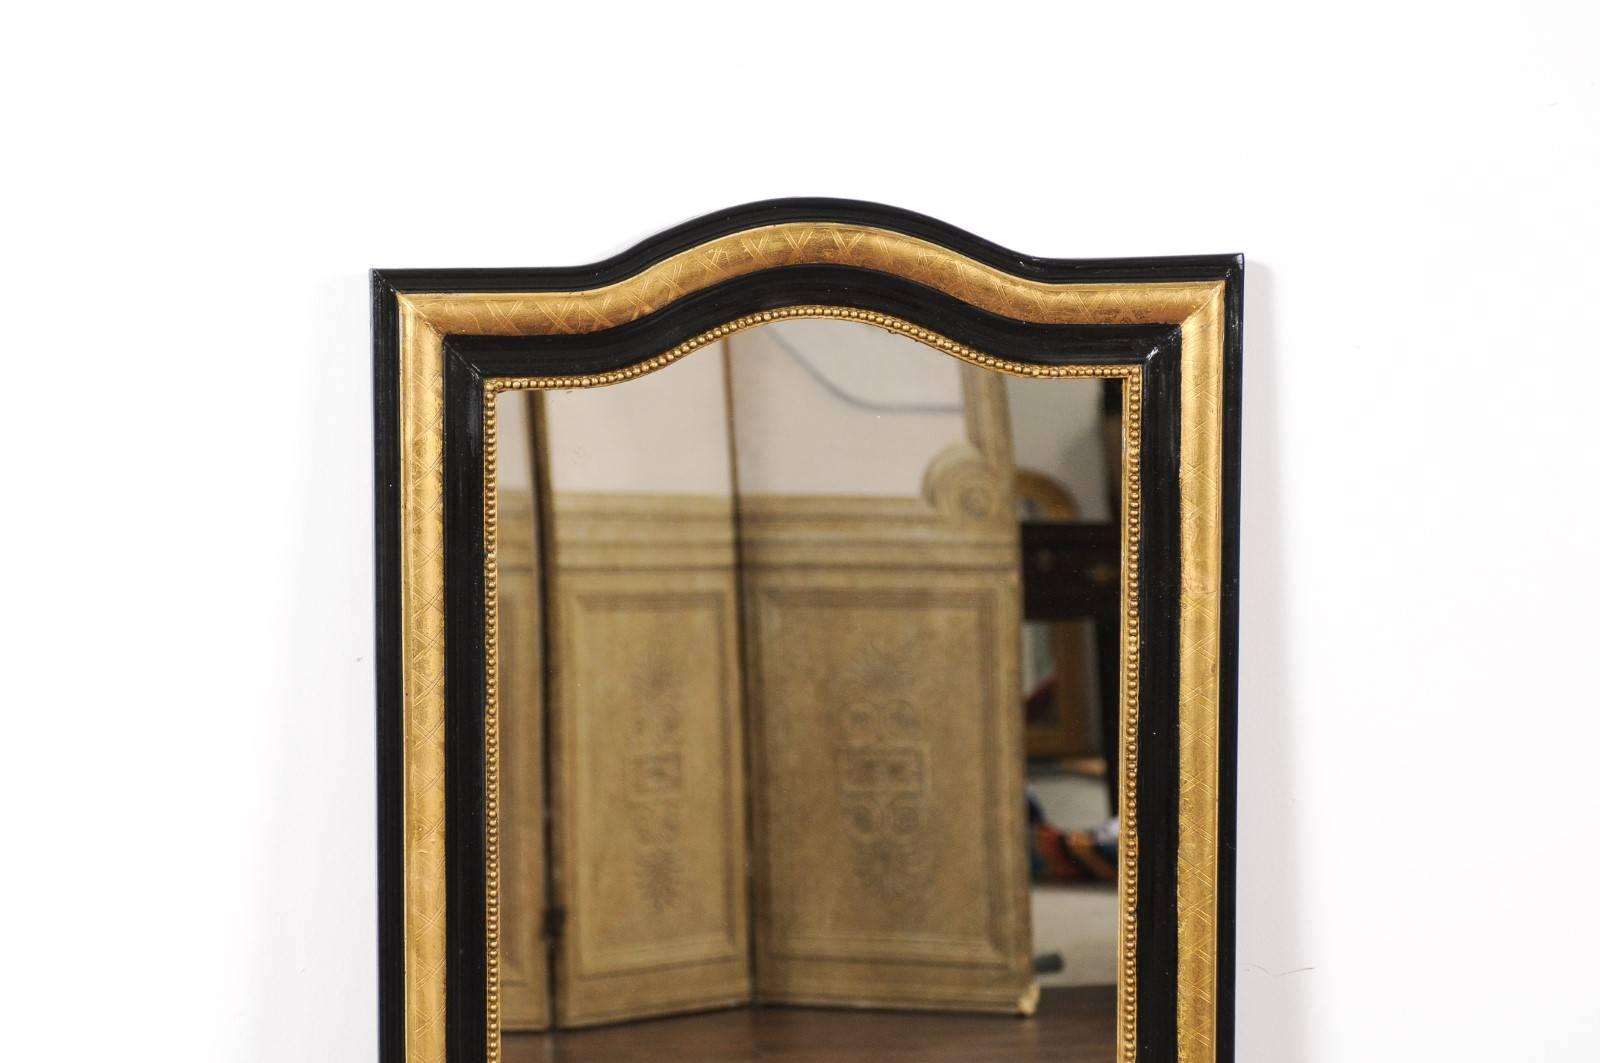 20th Century French Ebonized and Giltwood Mirror with X-Shaped Motifs, circa 1900